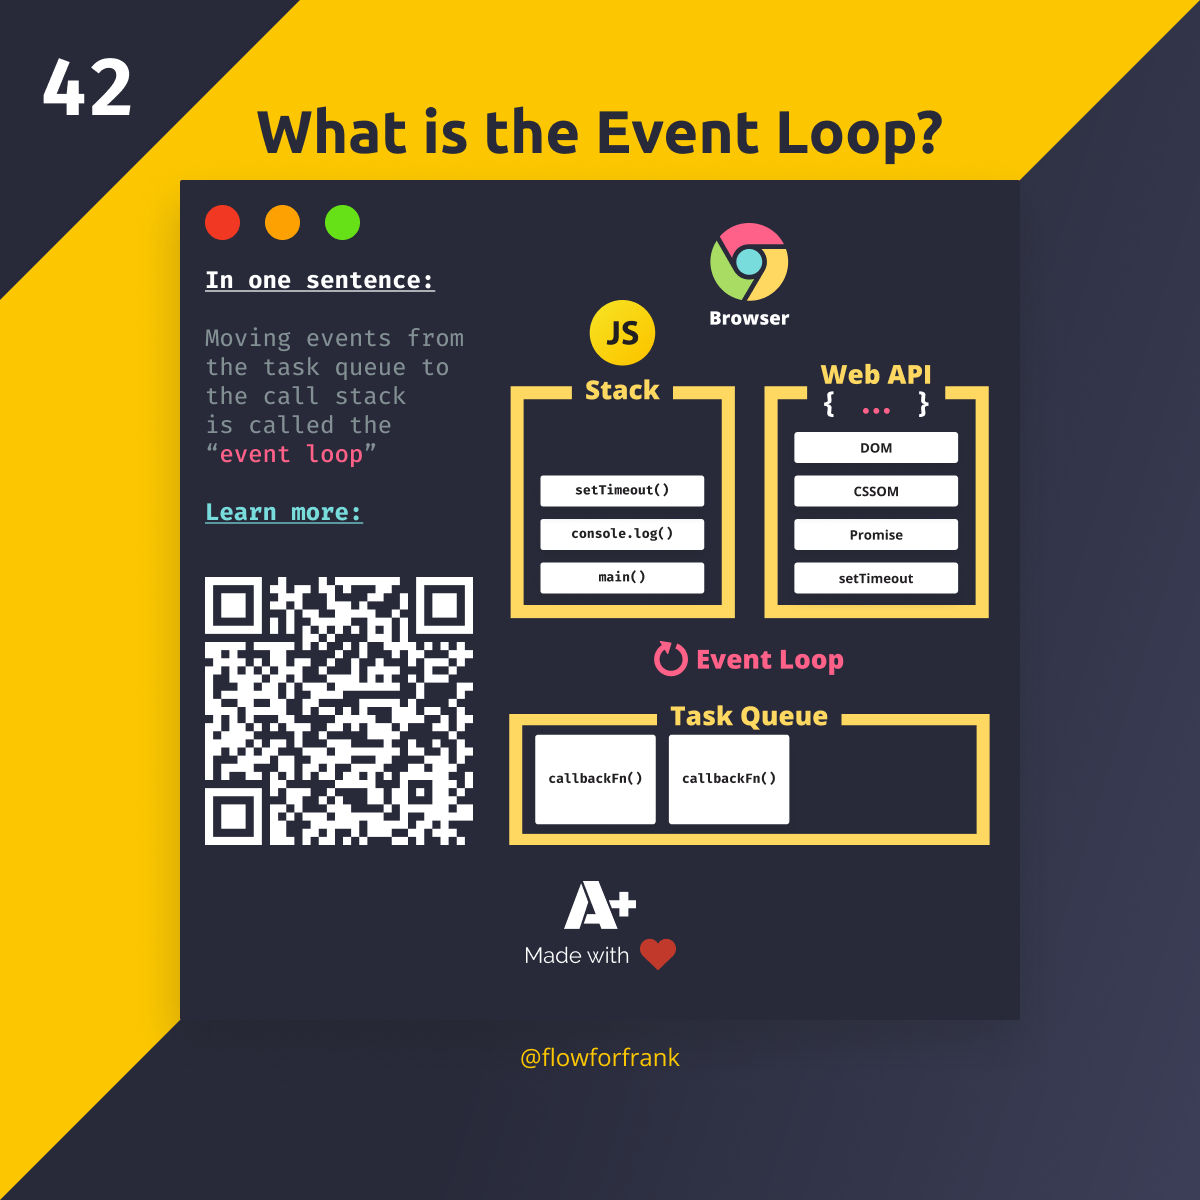 What is the Event Loop?